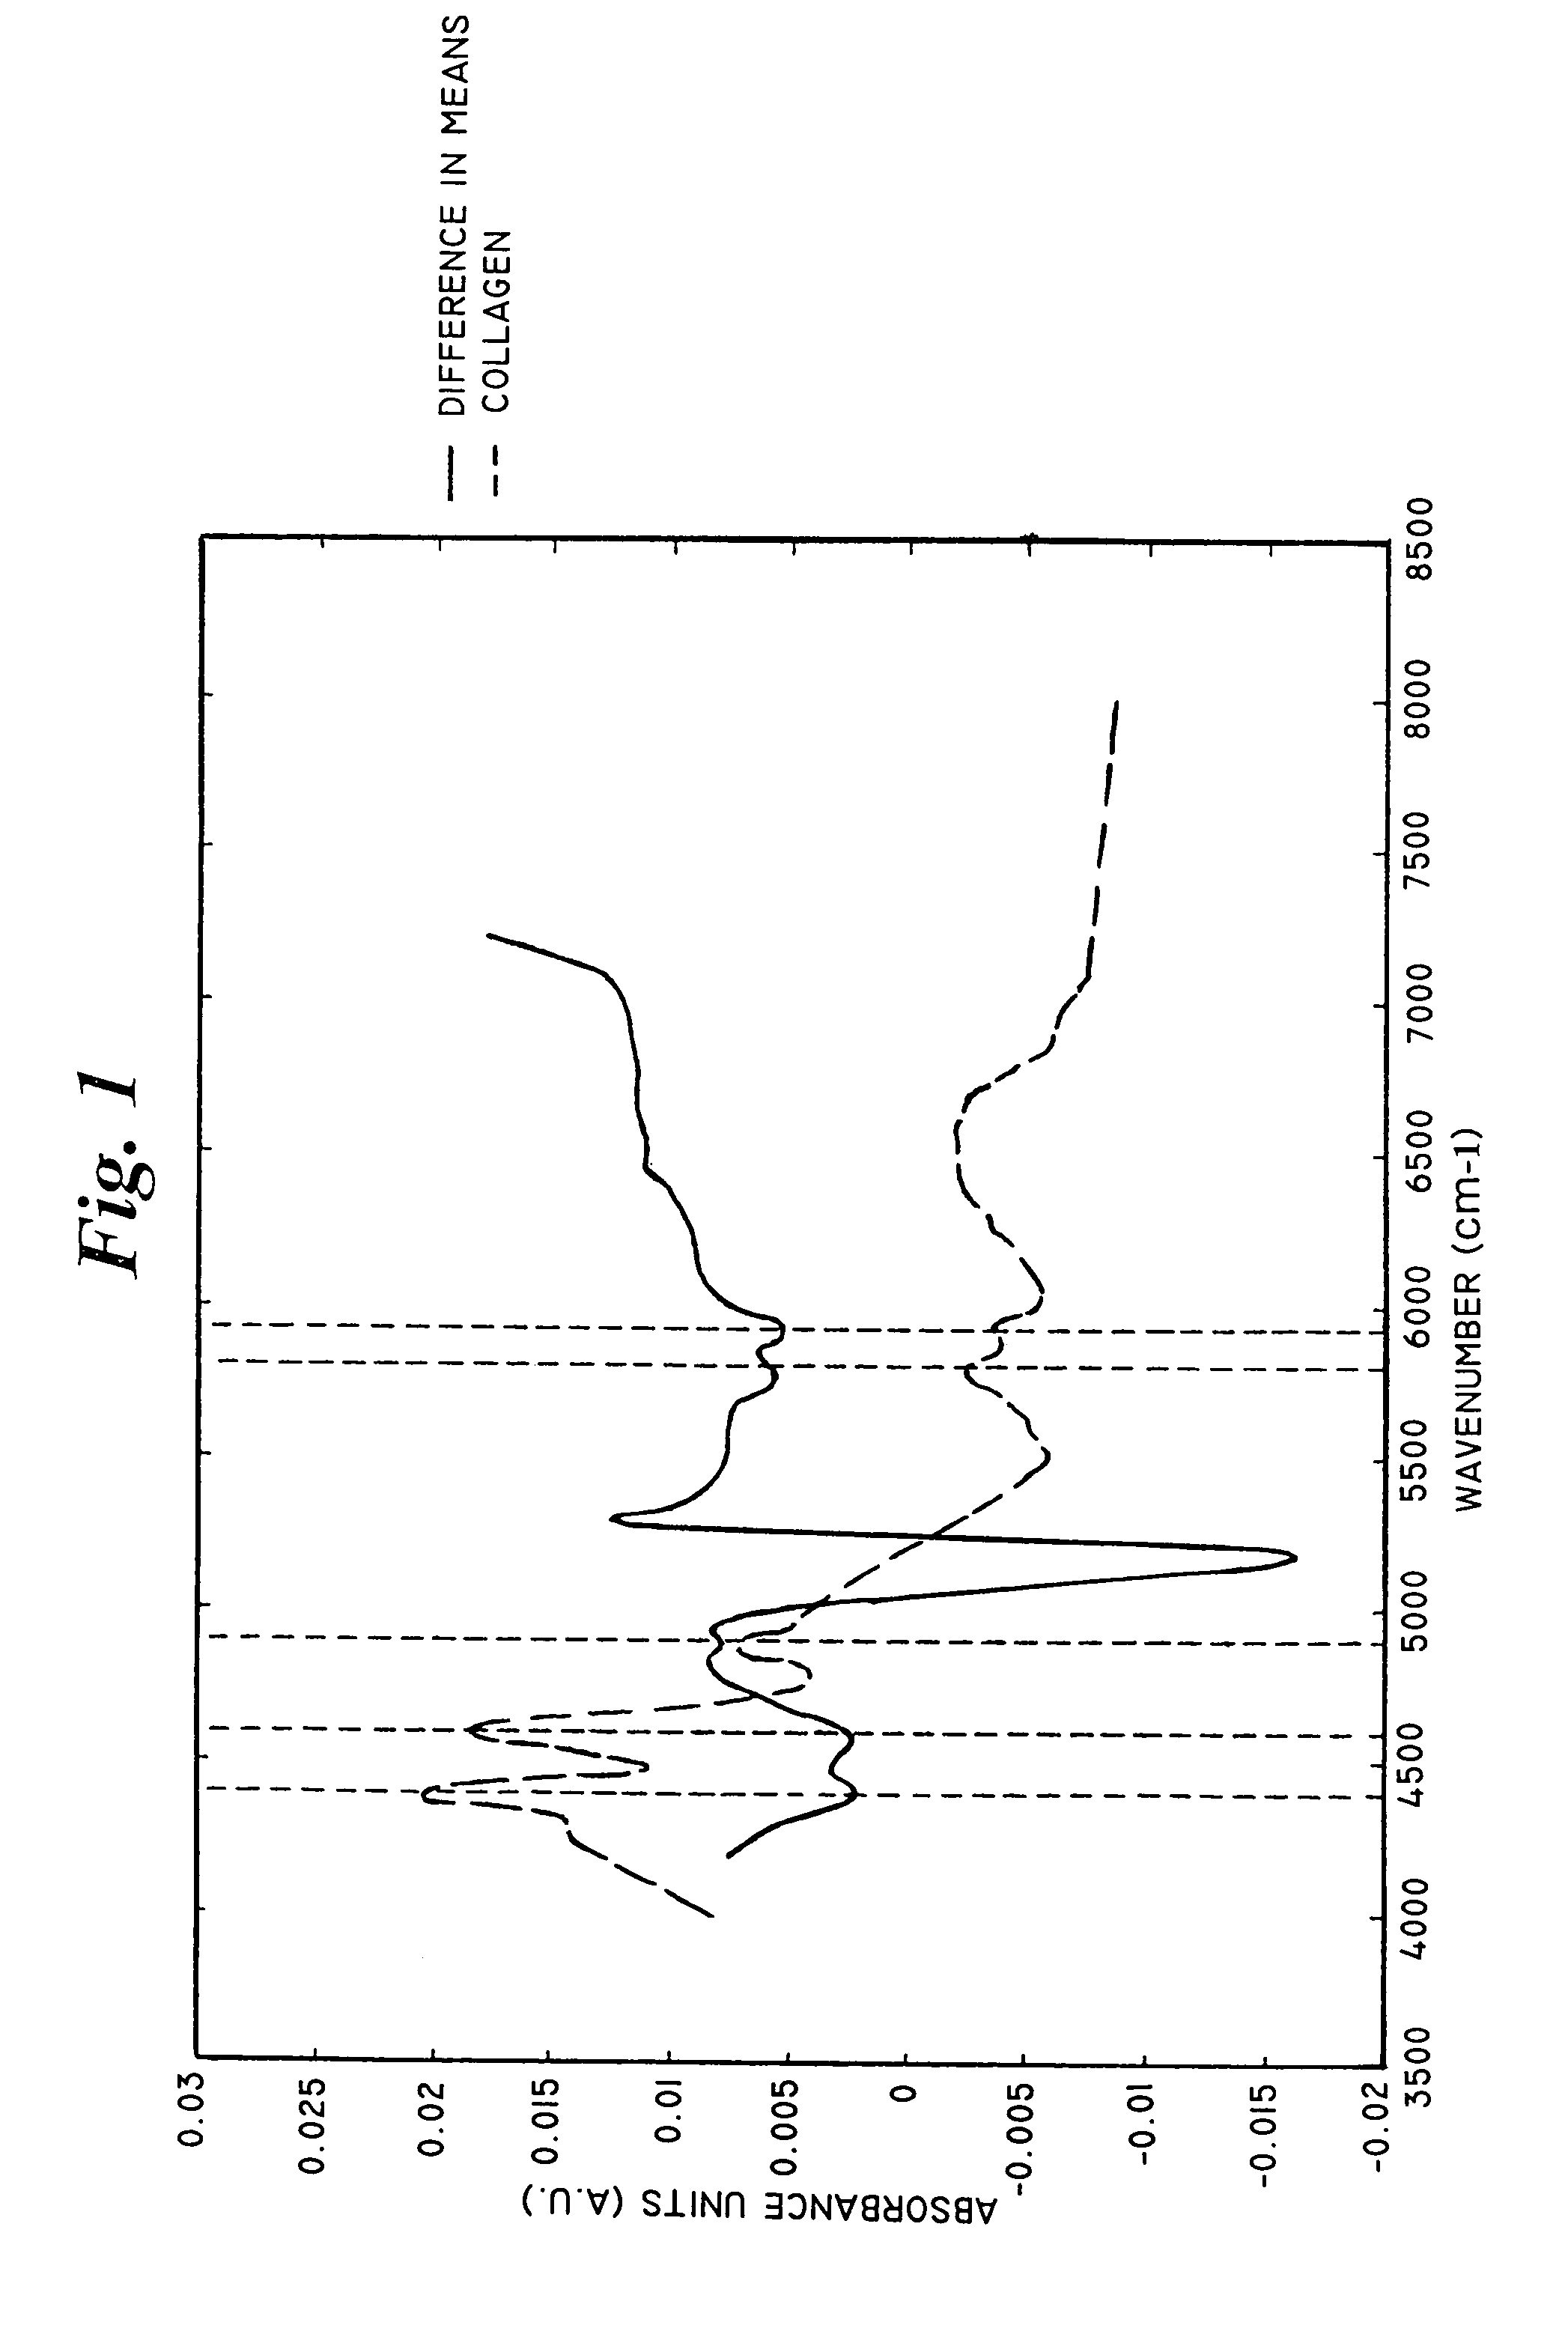 Apparatus and method for spectroscopic analysis of tissue to detect diabetes in an individual